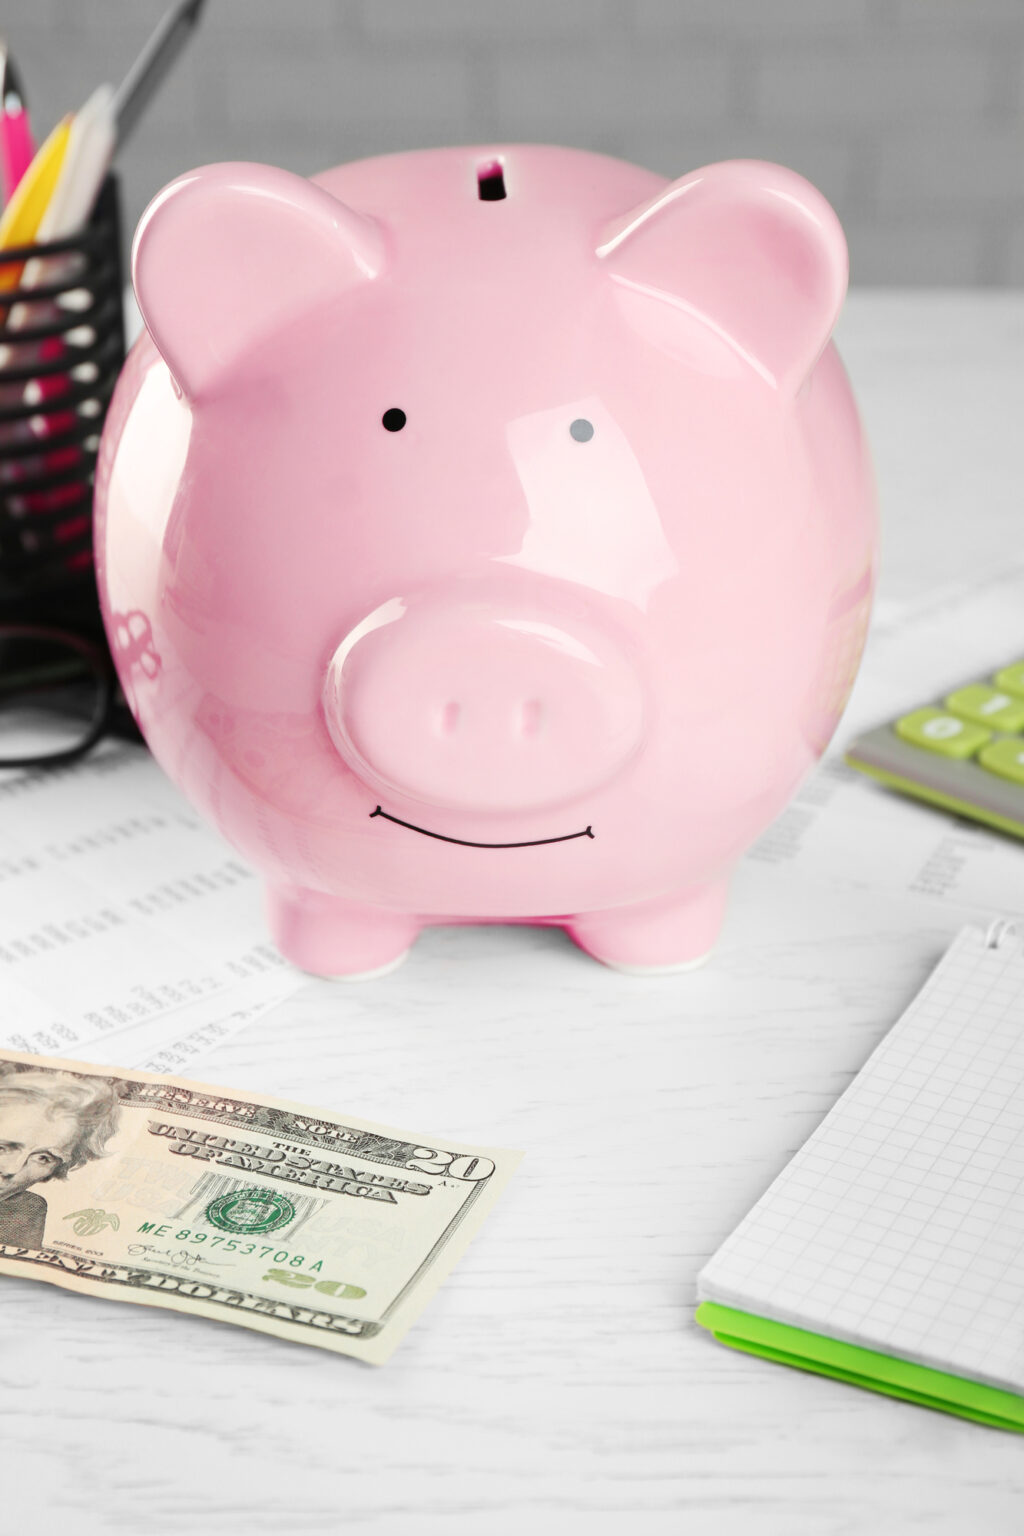 budget with pink piggy bank